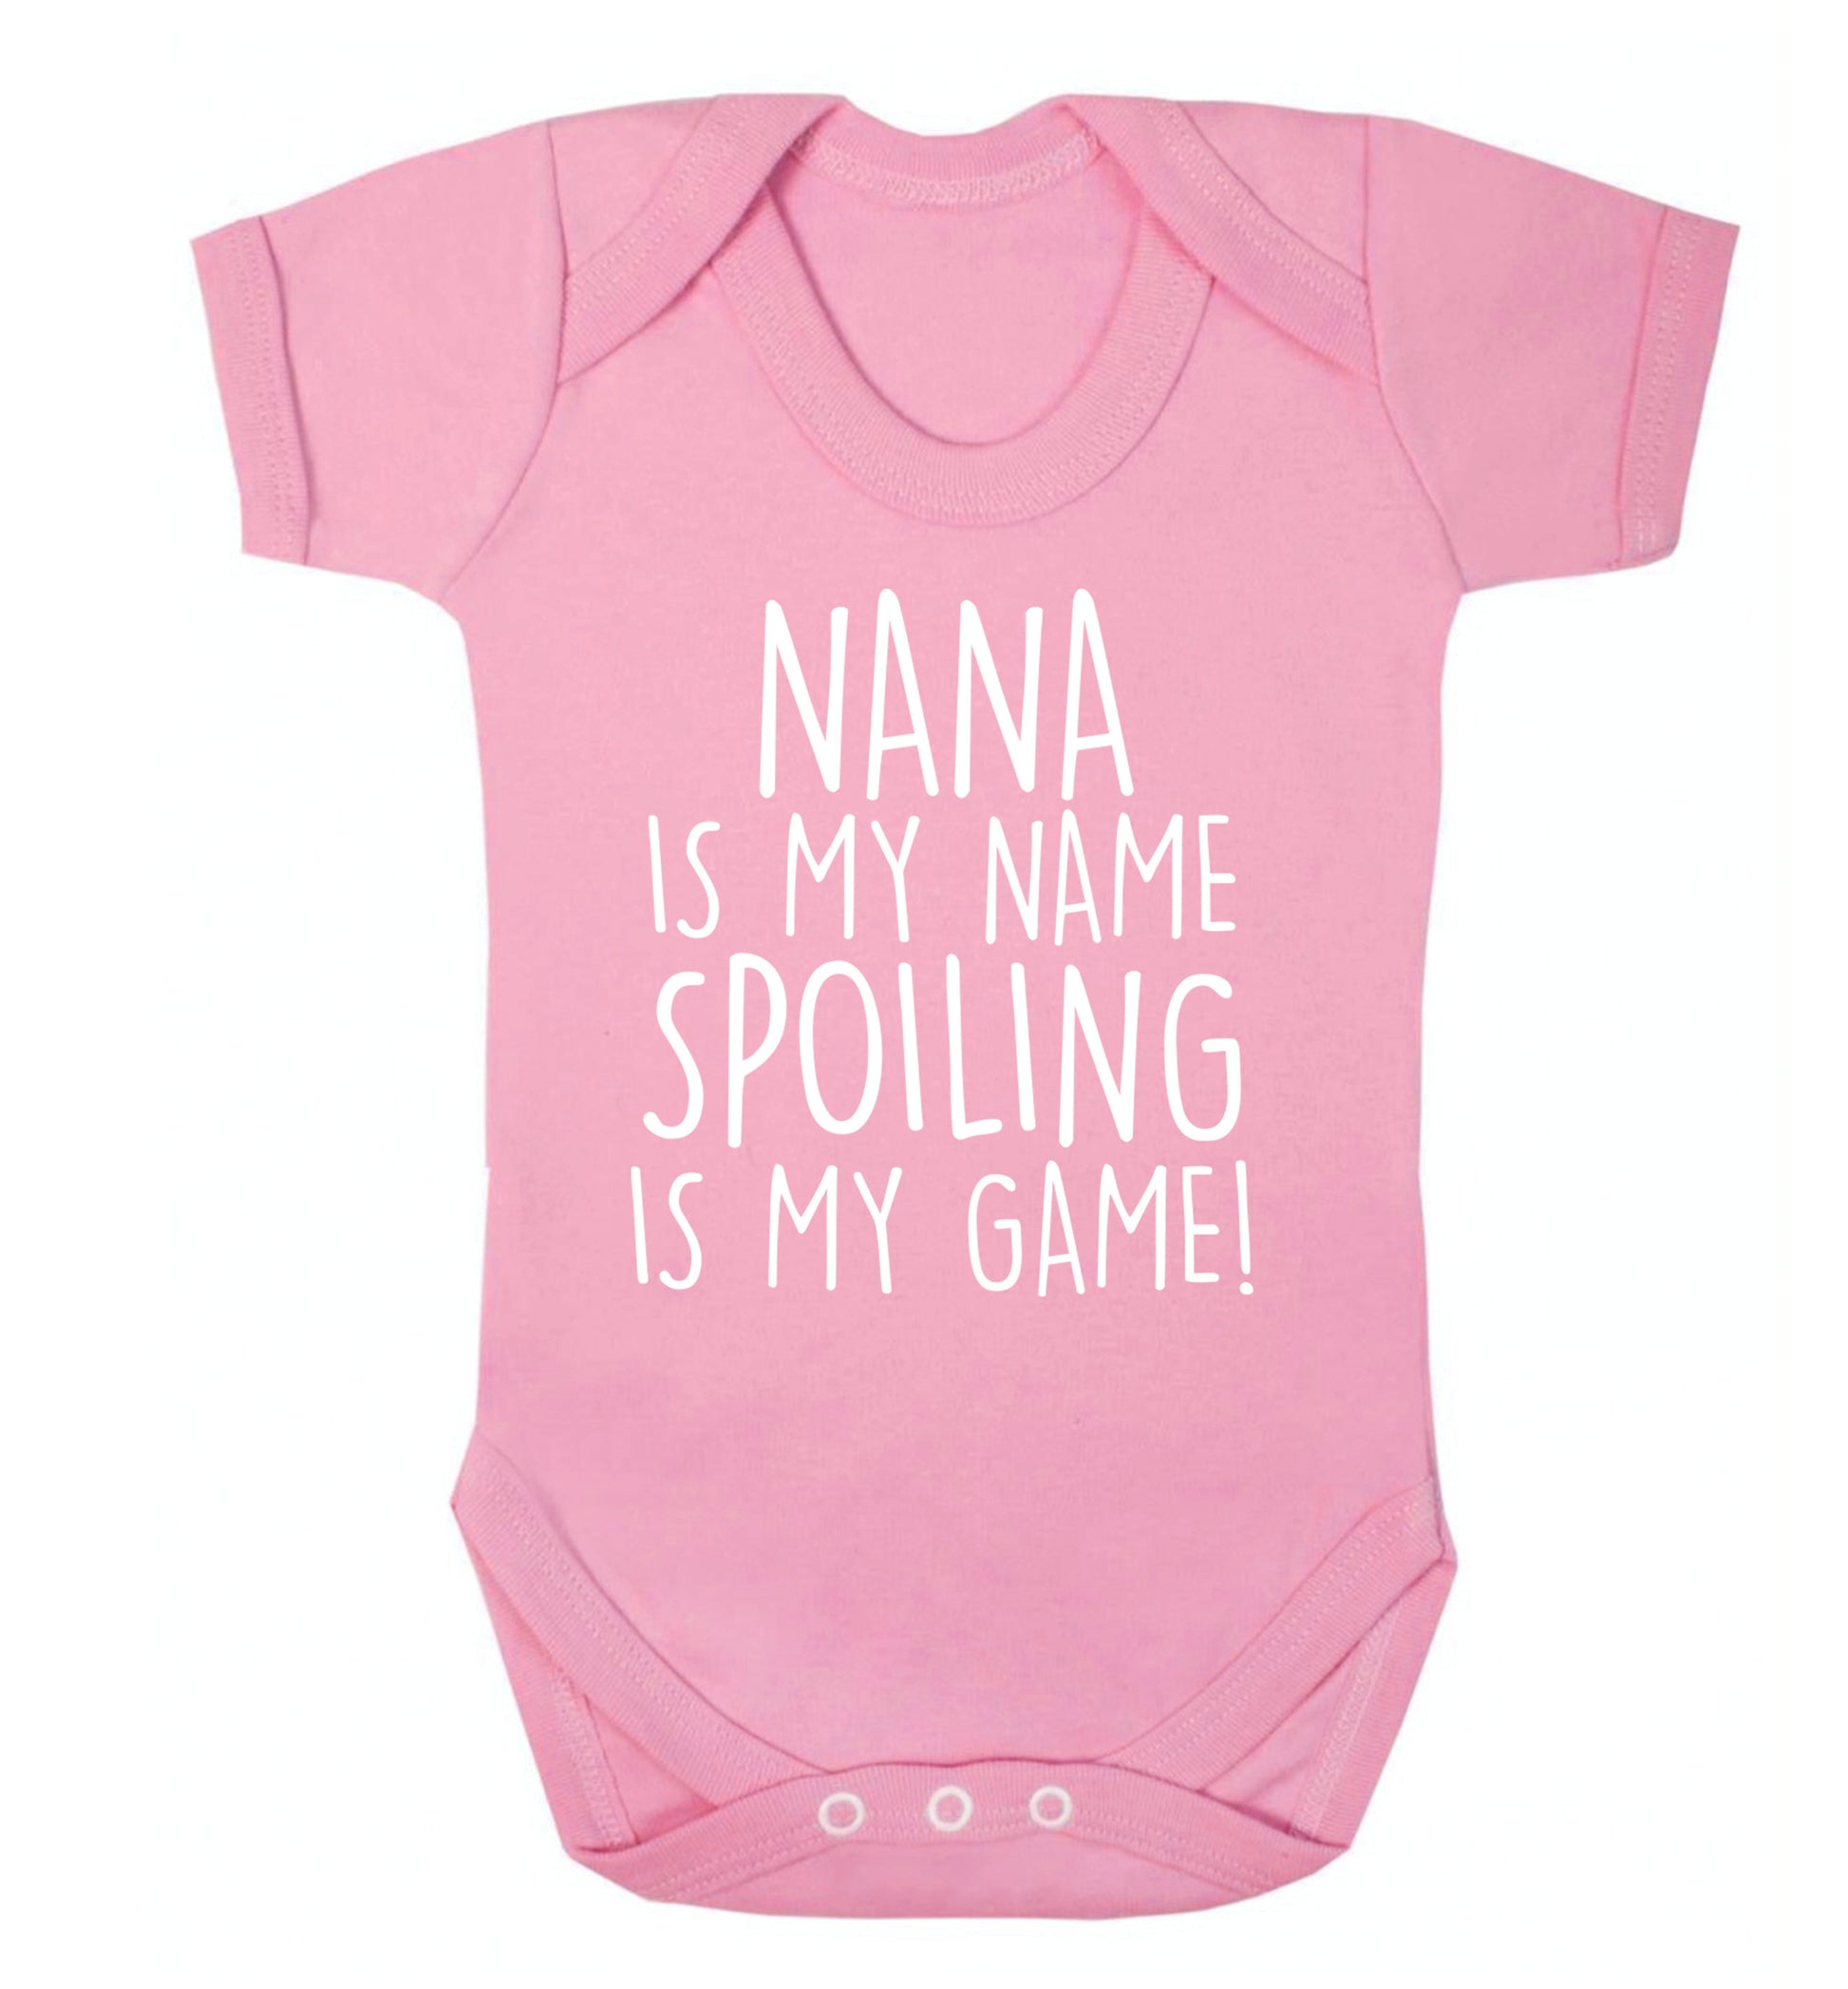 Nana is my name, spoiling is my game Baby Vest pale pink 18-24 months